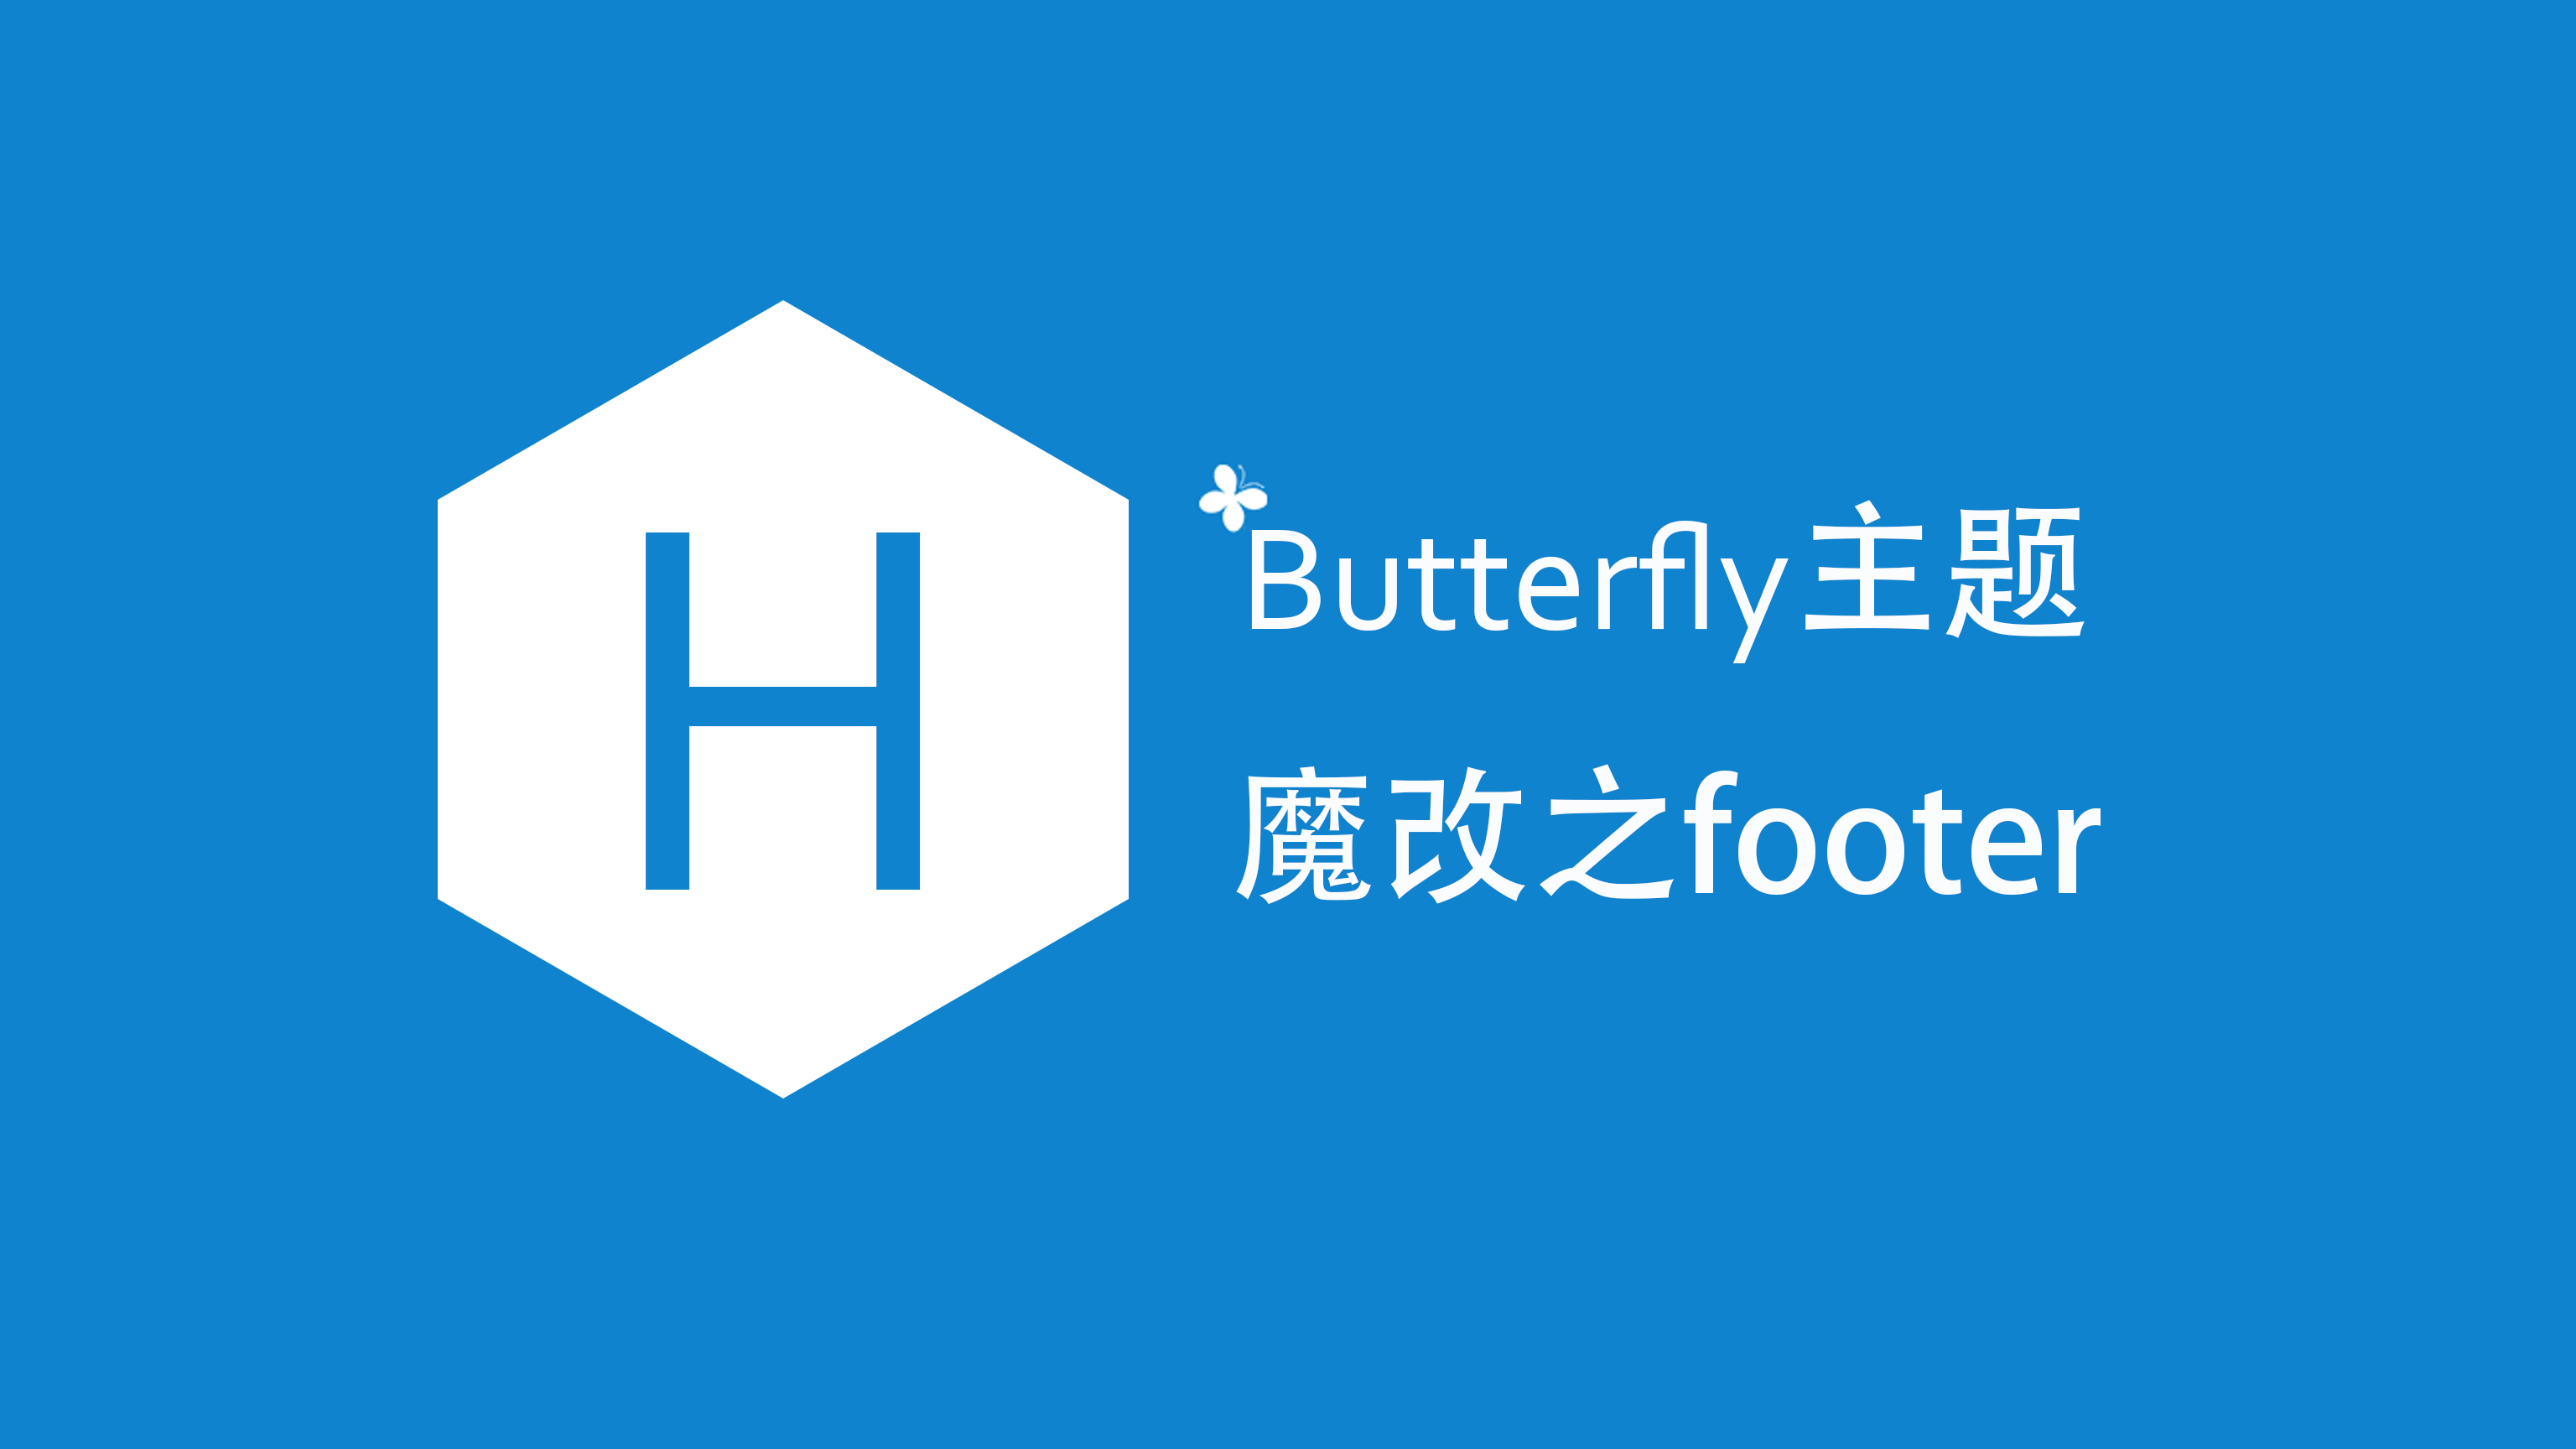 Butterfly主题魔改之footer